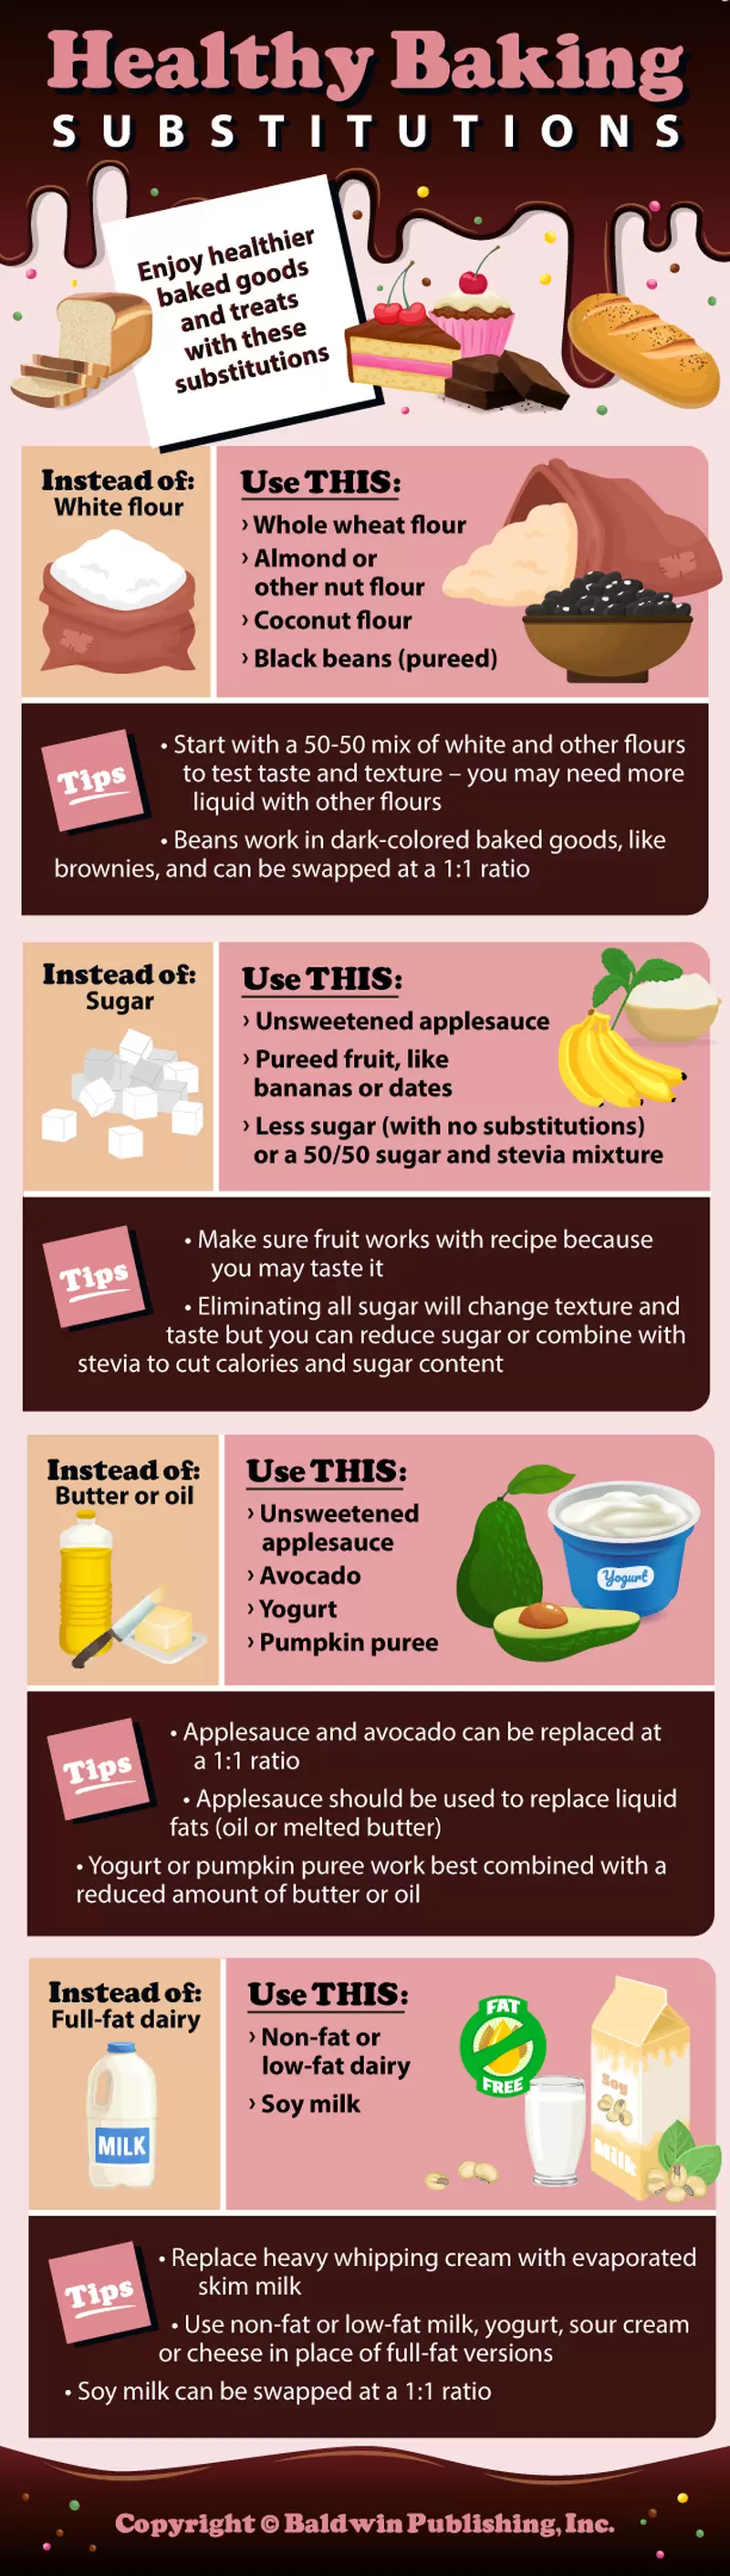 healthy baking infographic